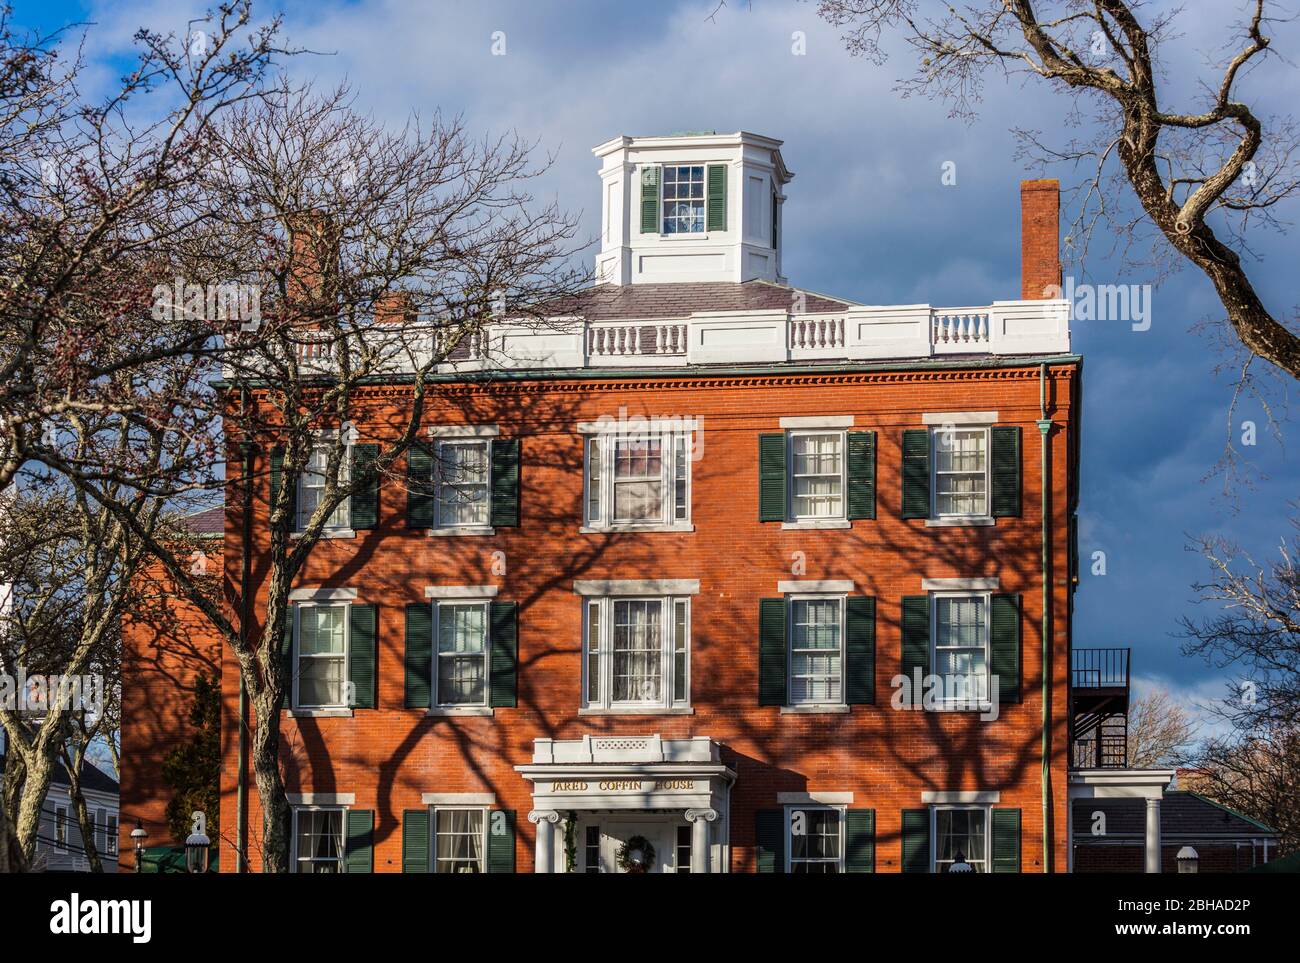 USA, New England, Massachusetts, Nantucket Island, Nantucket Town, Jared Coffin House, former whaling mansion and now a hotel Stock Photo